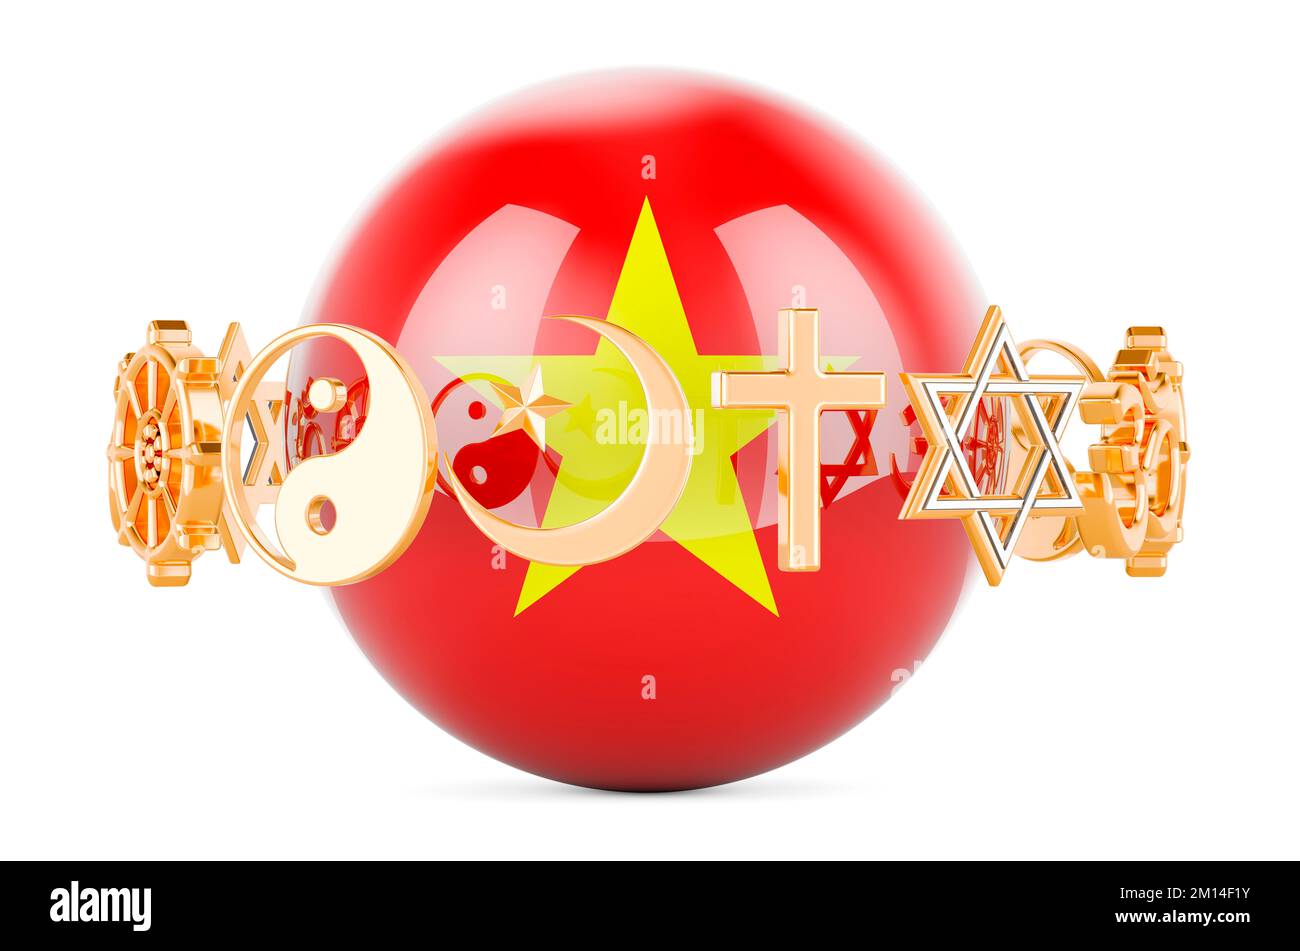 Vietnamese flag painted on sphere with religions symbols around, 3D rendering isolated on white background Stock Photo